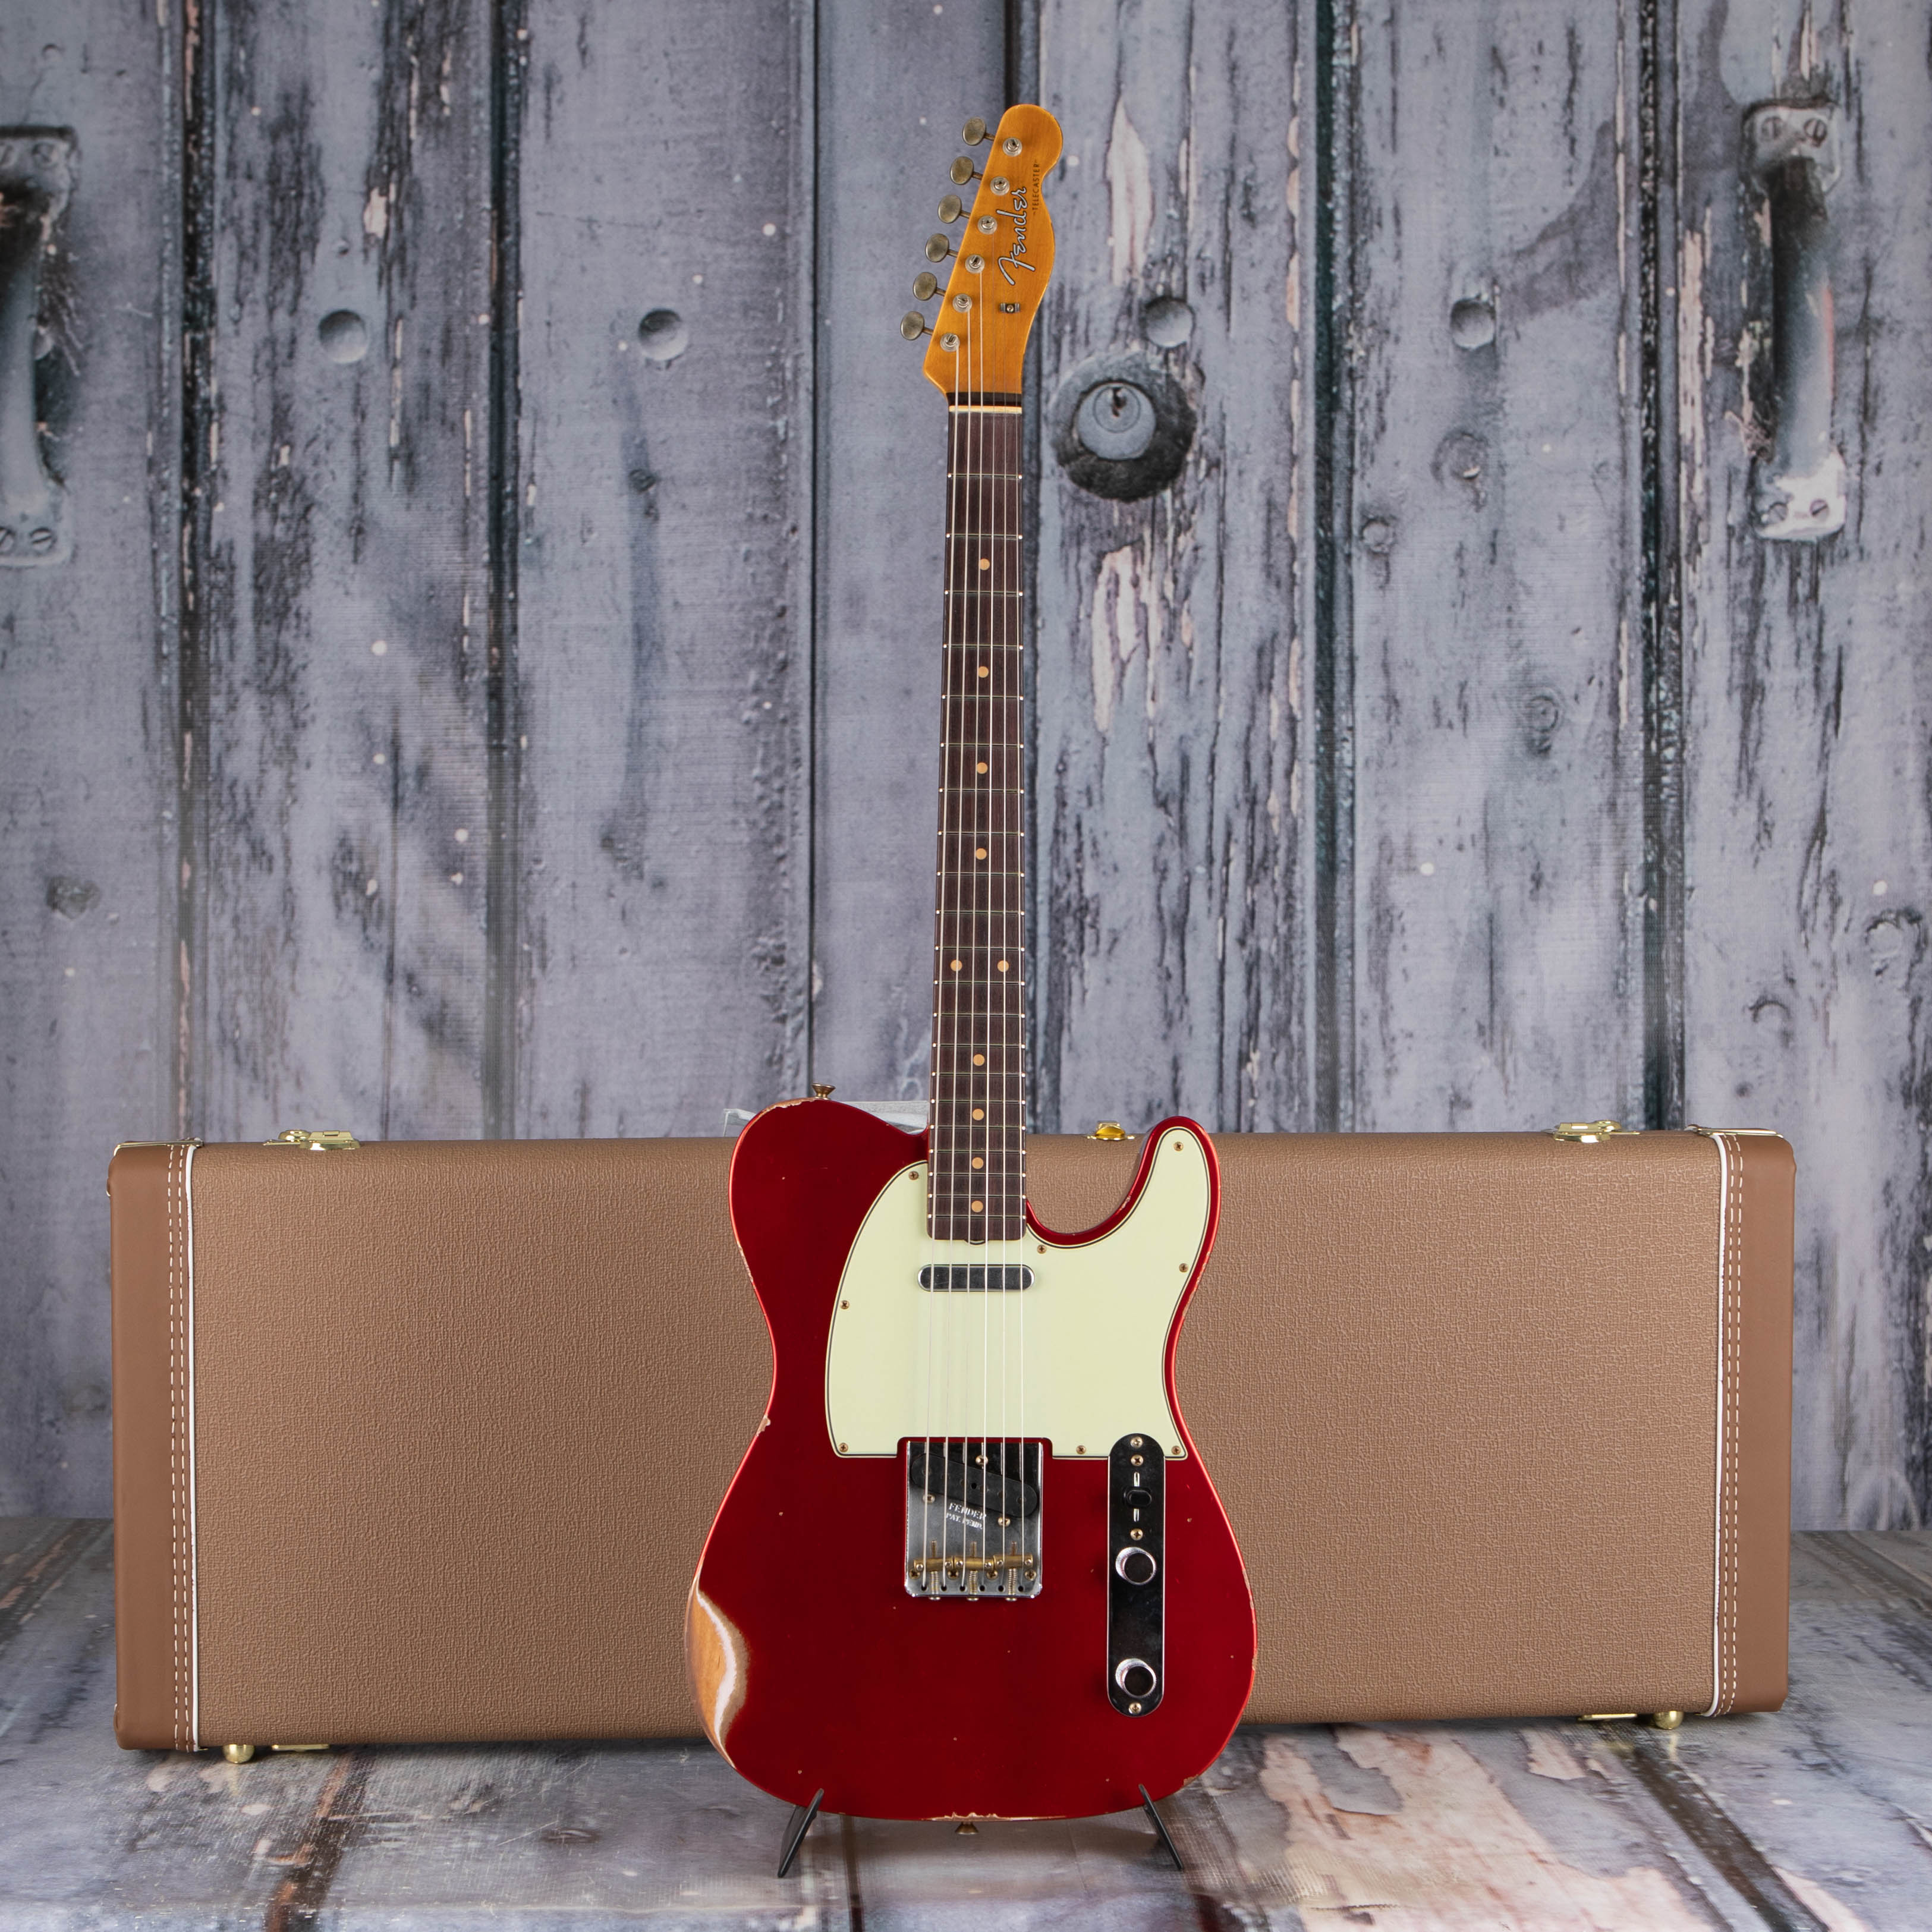 Fender Custom Shop Limited 1961 Telecaster Relic Electric Guitar, Aged Candy Apple Red, case